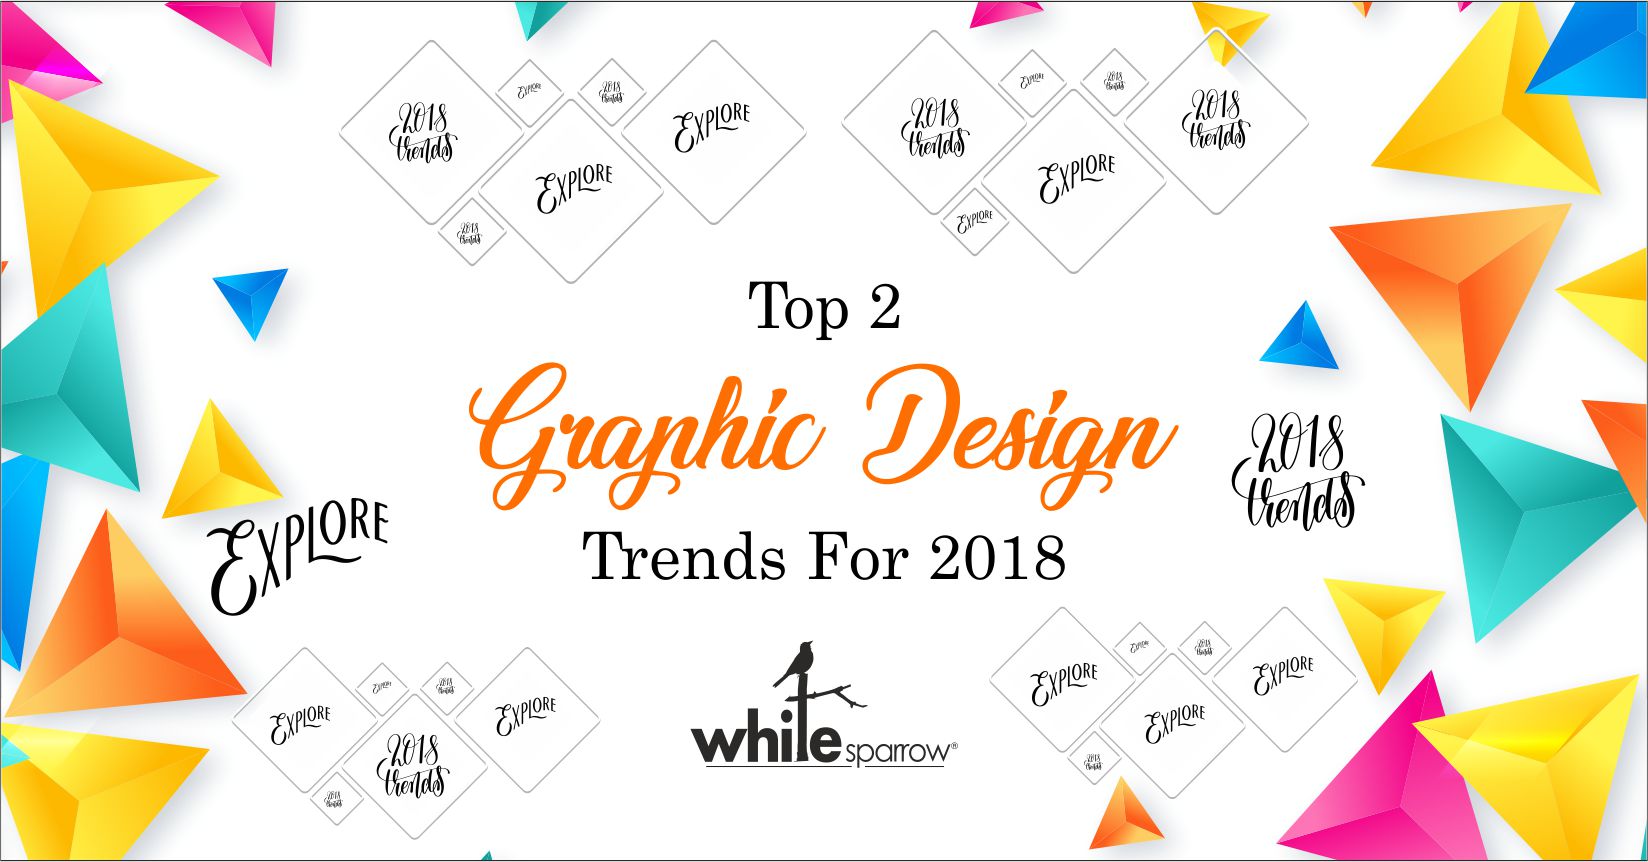 Top 2 graphic design trends for 2018